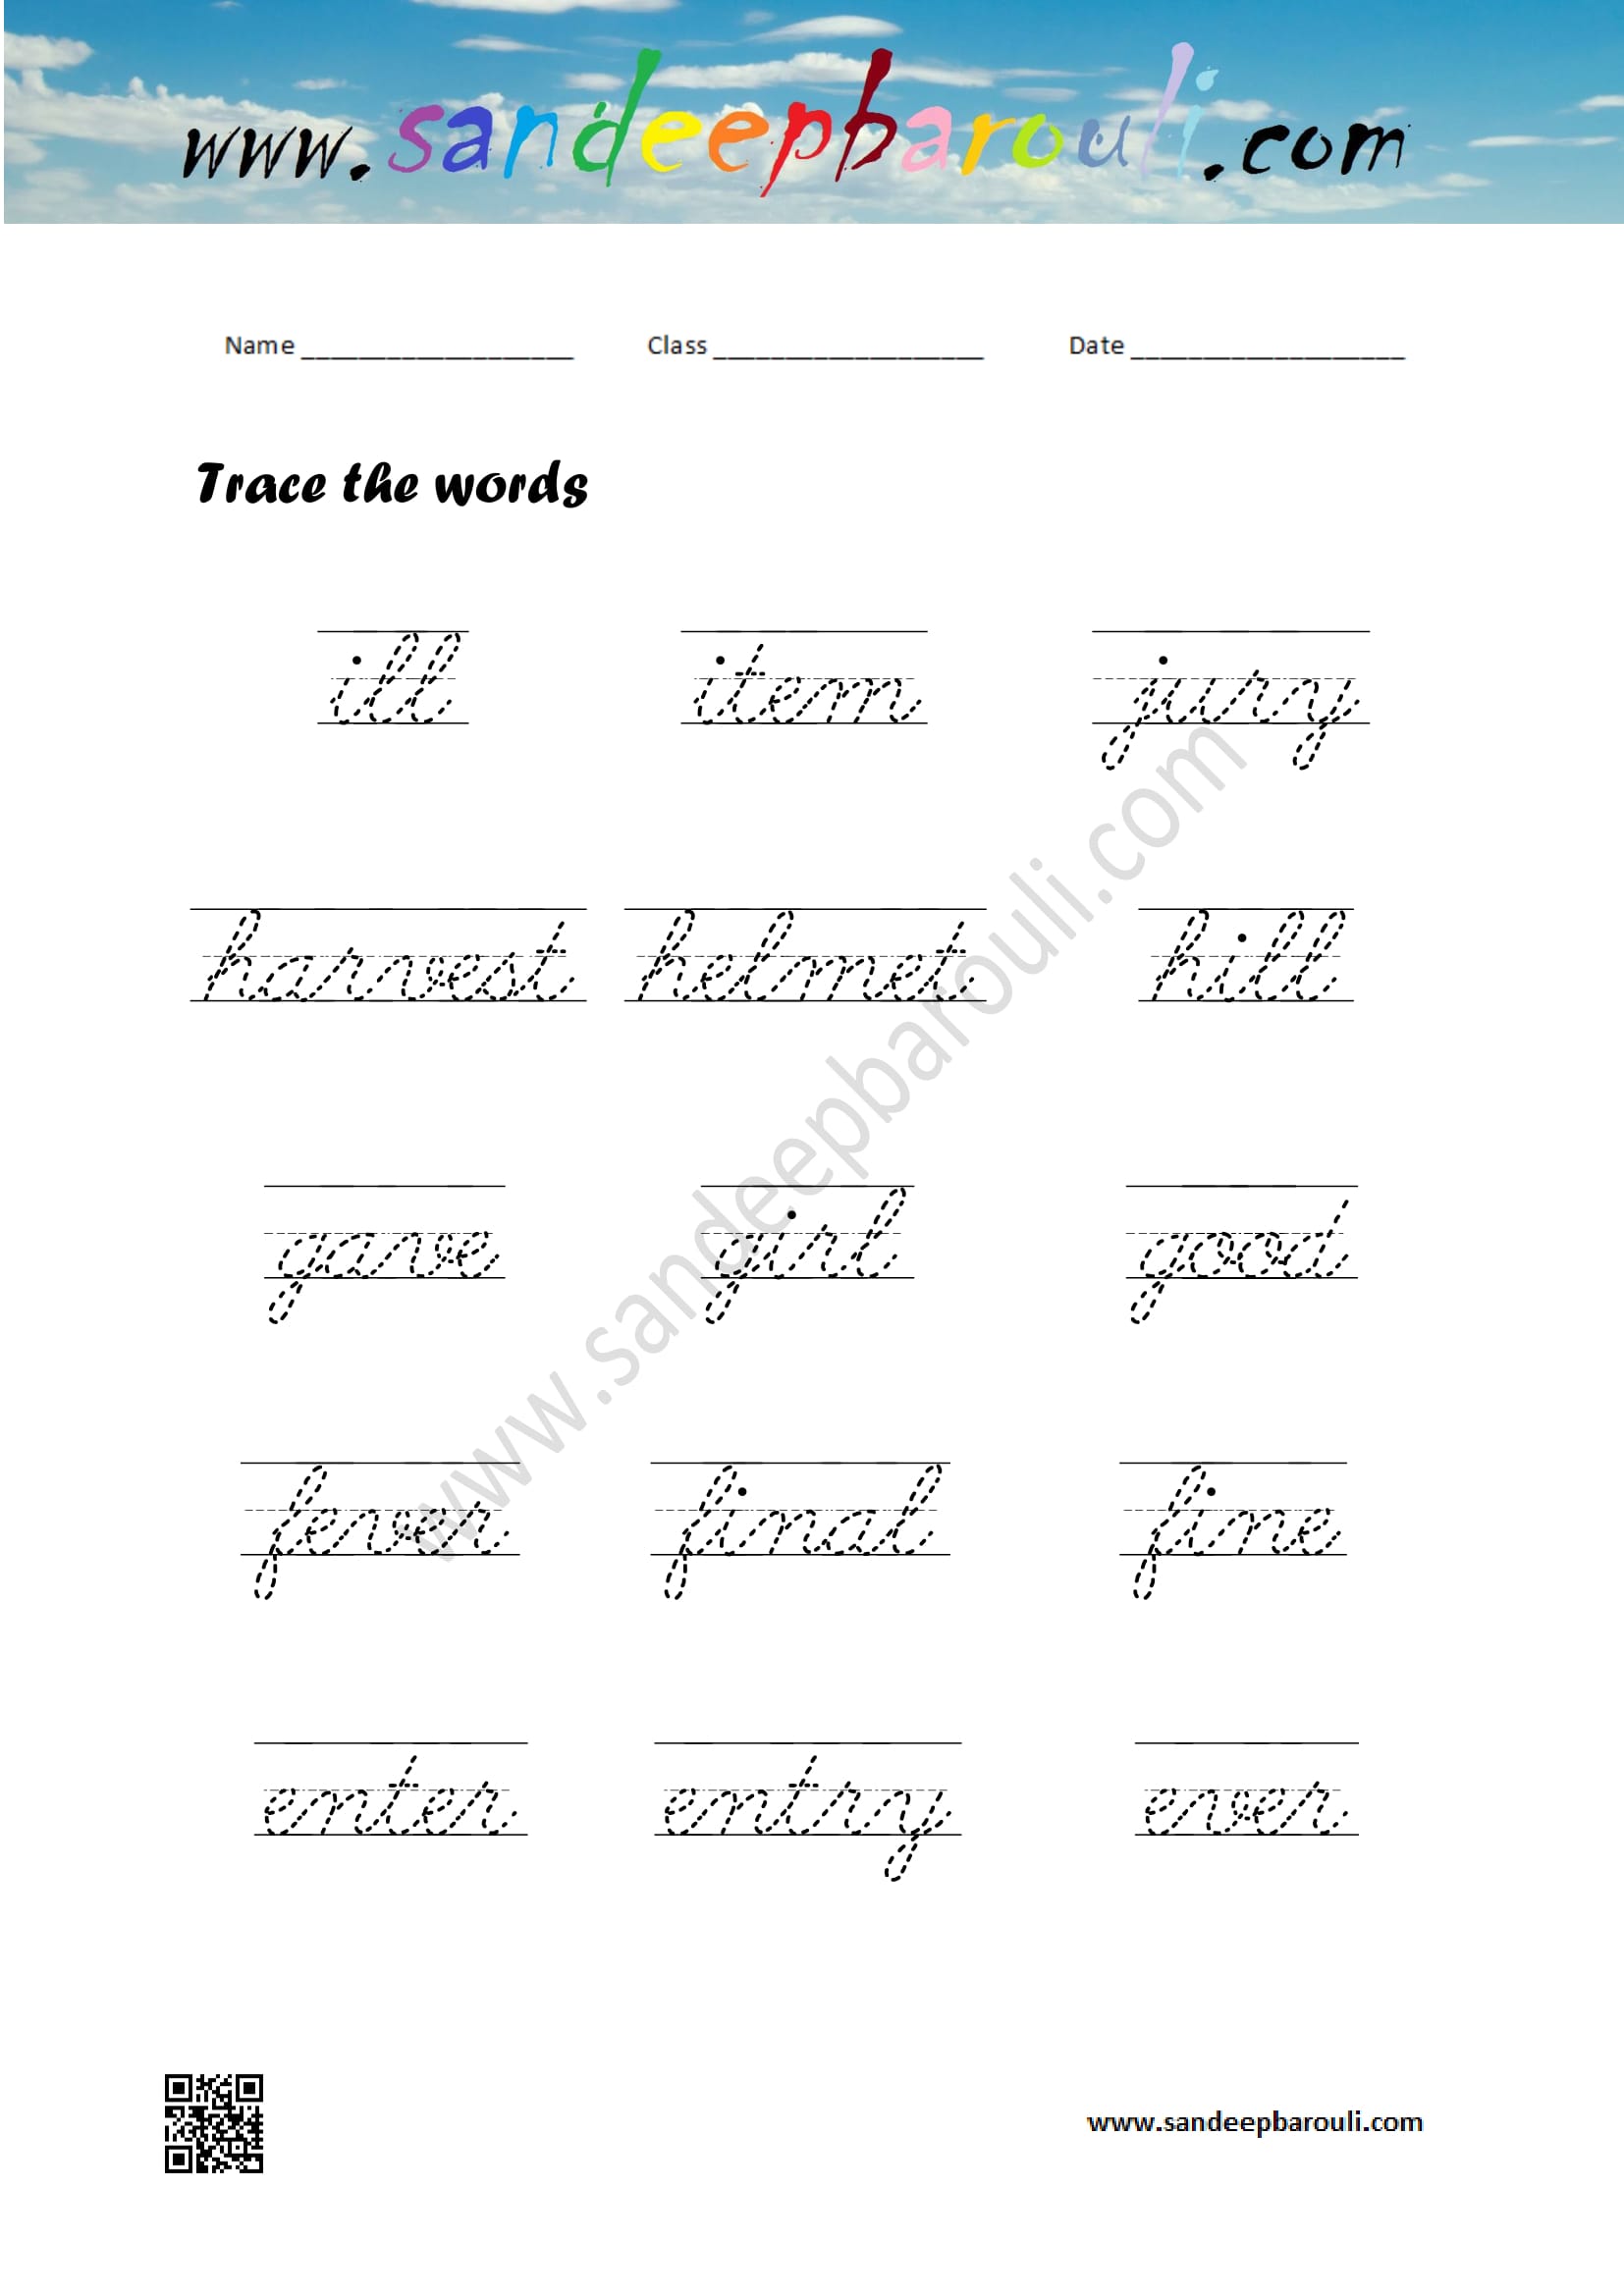 Cursive Writing Worksheet – Trace the words (36)